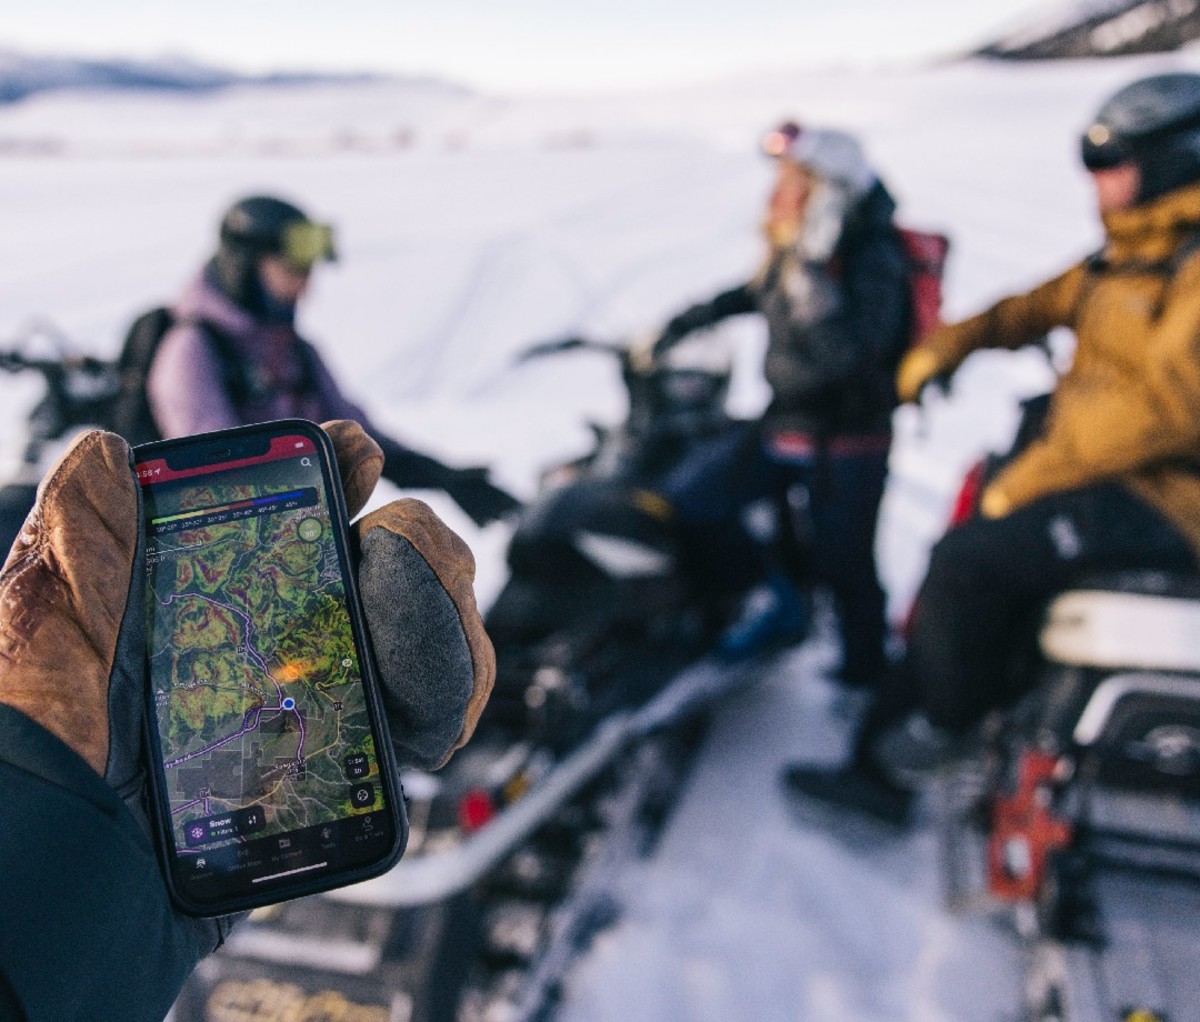 Hand displays navigation app on a phone with snowmobilers in the background.